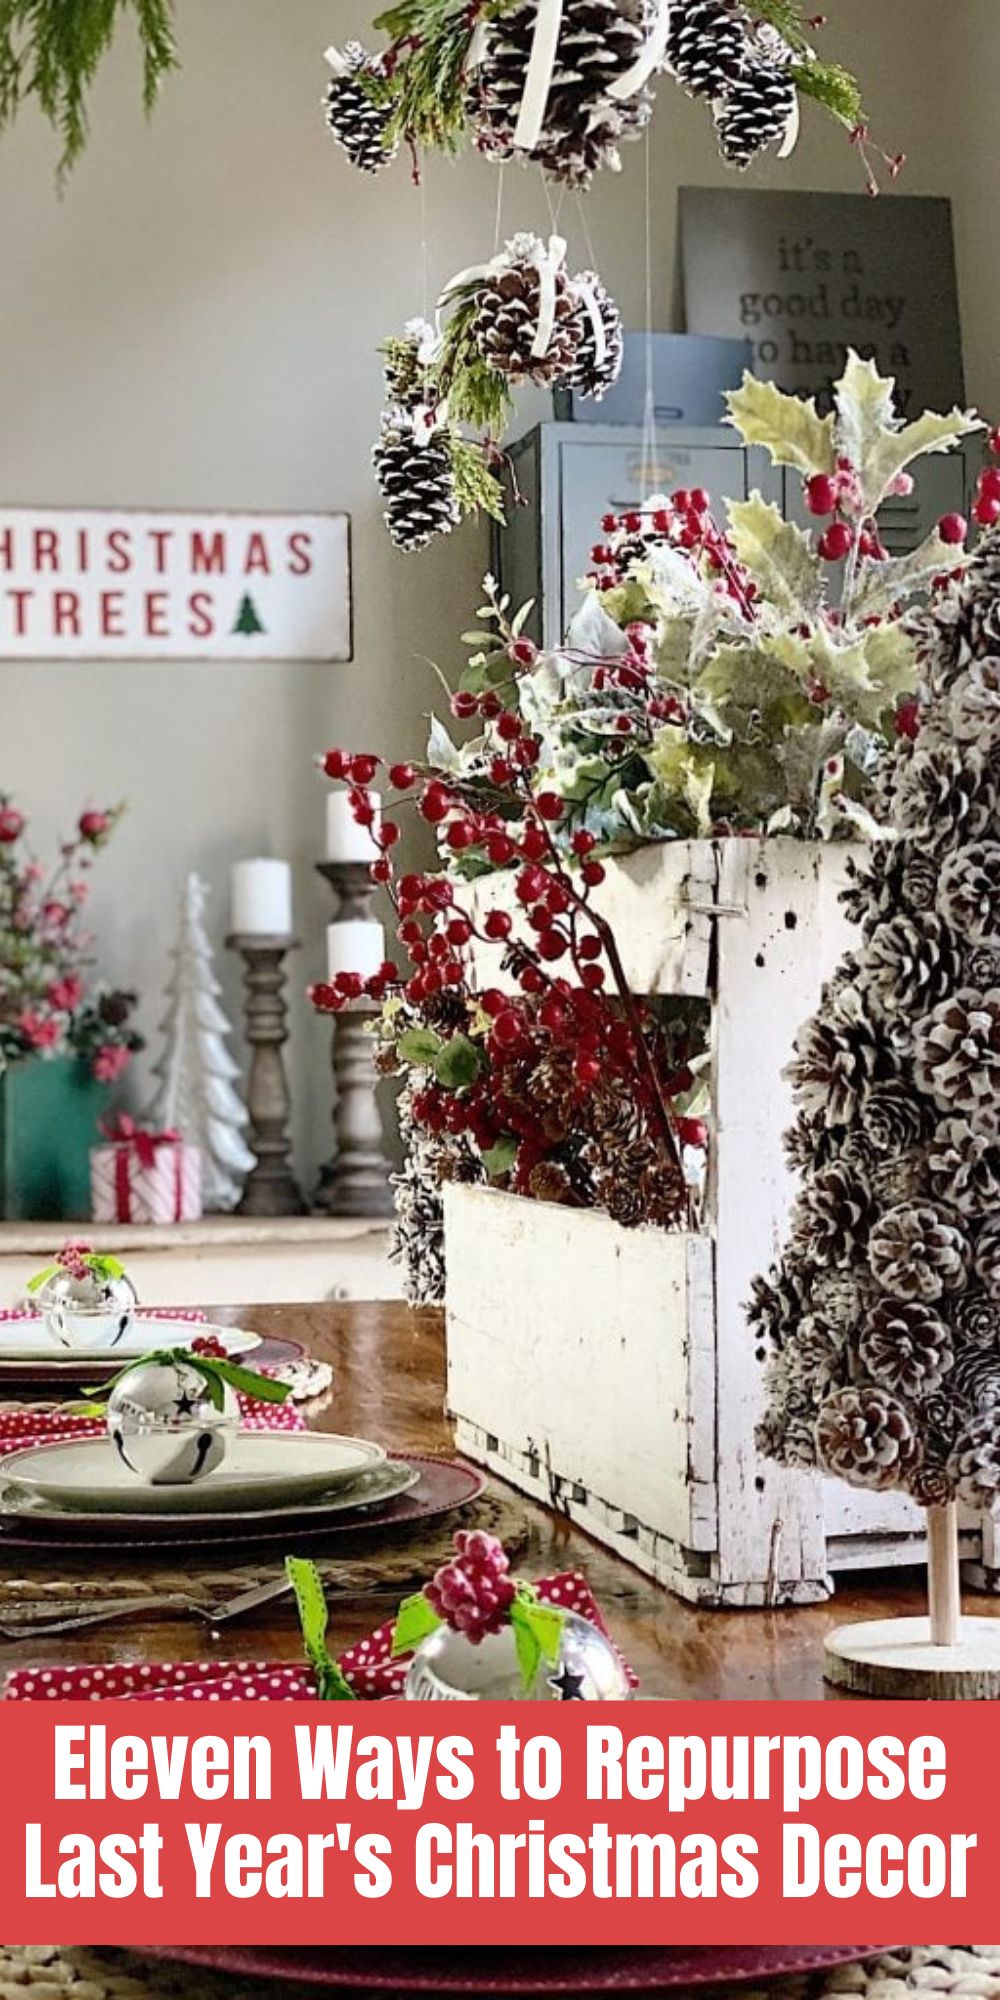 Welcome to day three of Twelve Days To Get Ready For Christmas. Today I am sharing eleven ways to repurpose last year’s Christmas decor.